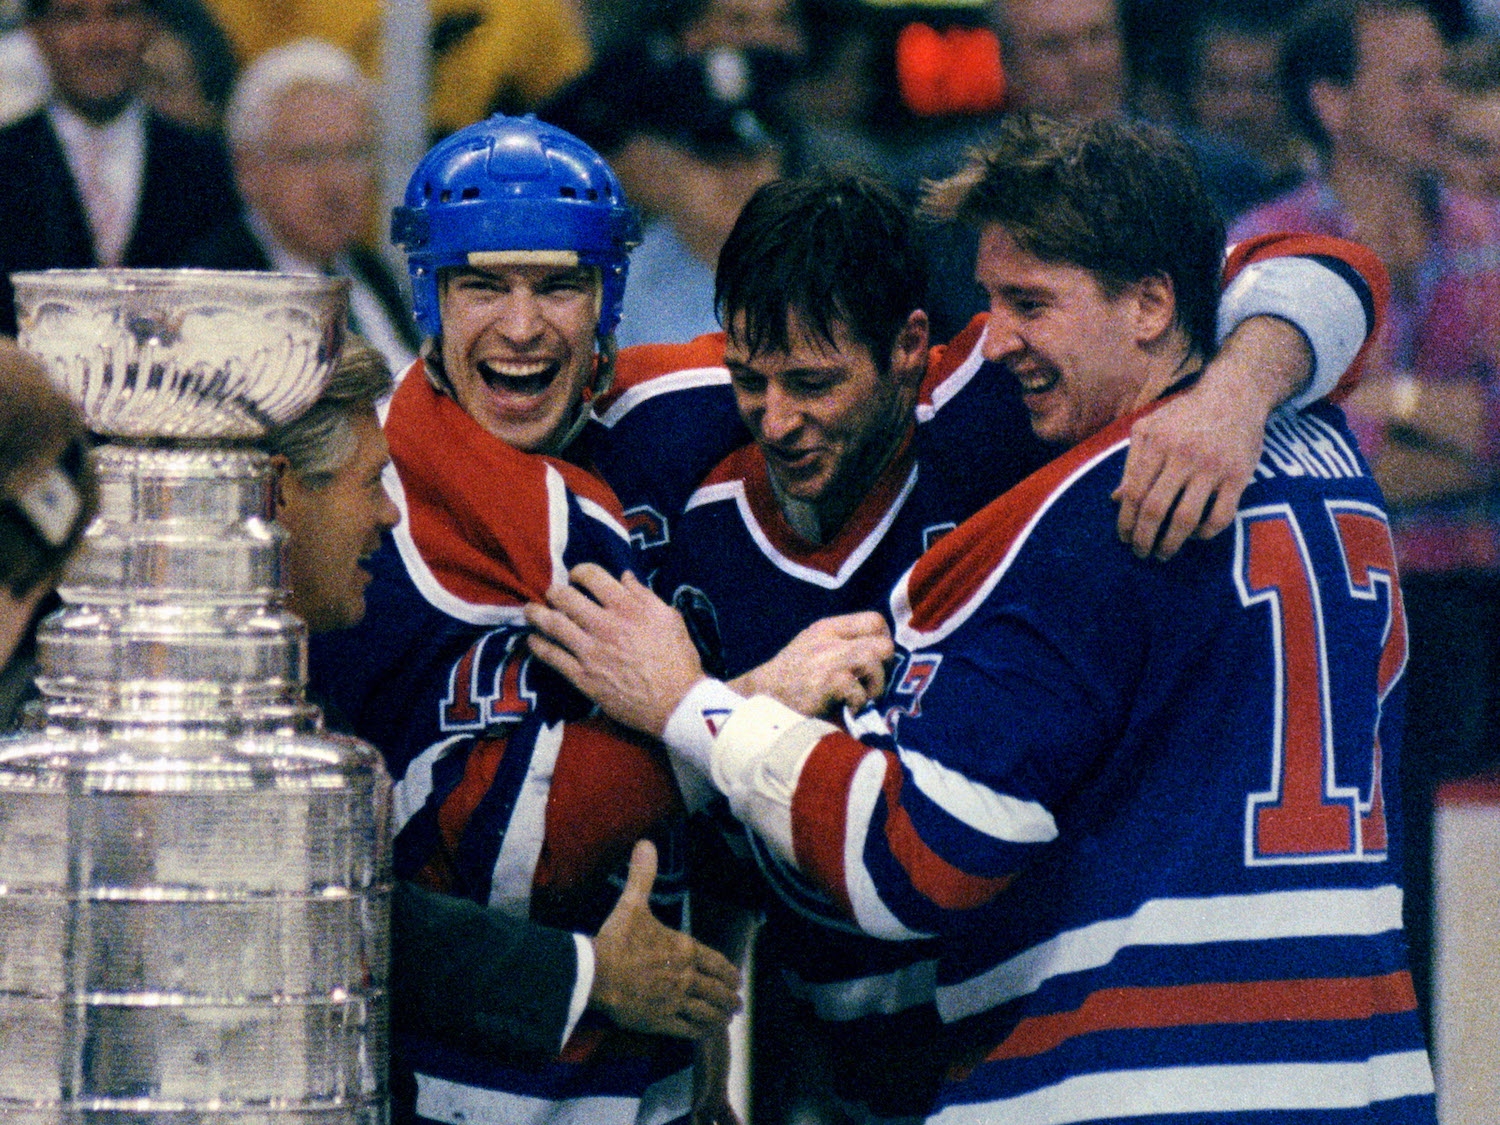 Paul Messier Hockey Stats and Profile at